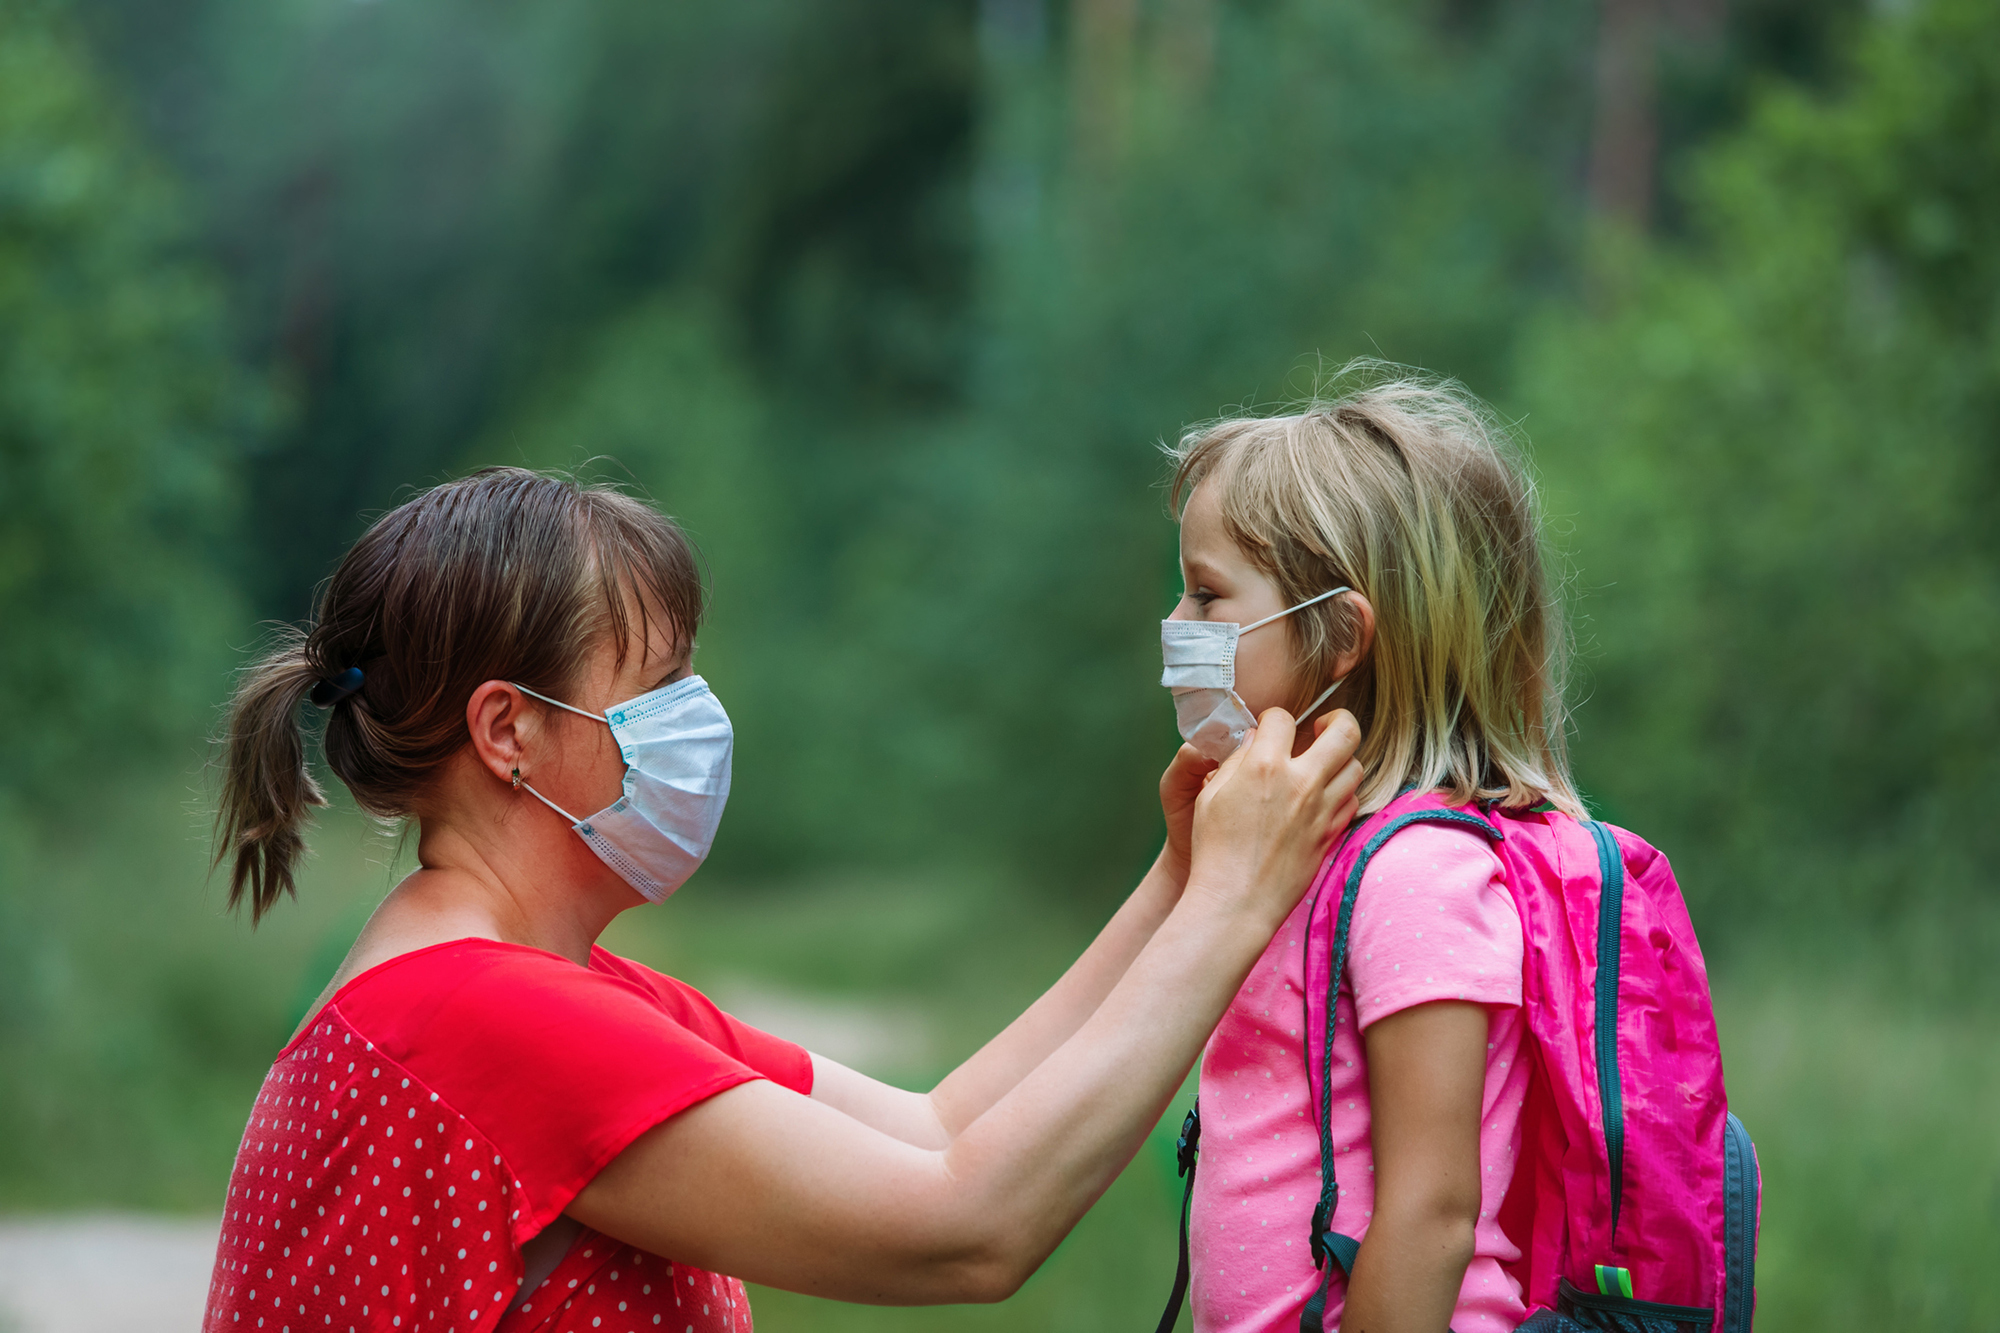 mother and child with masks going to school